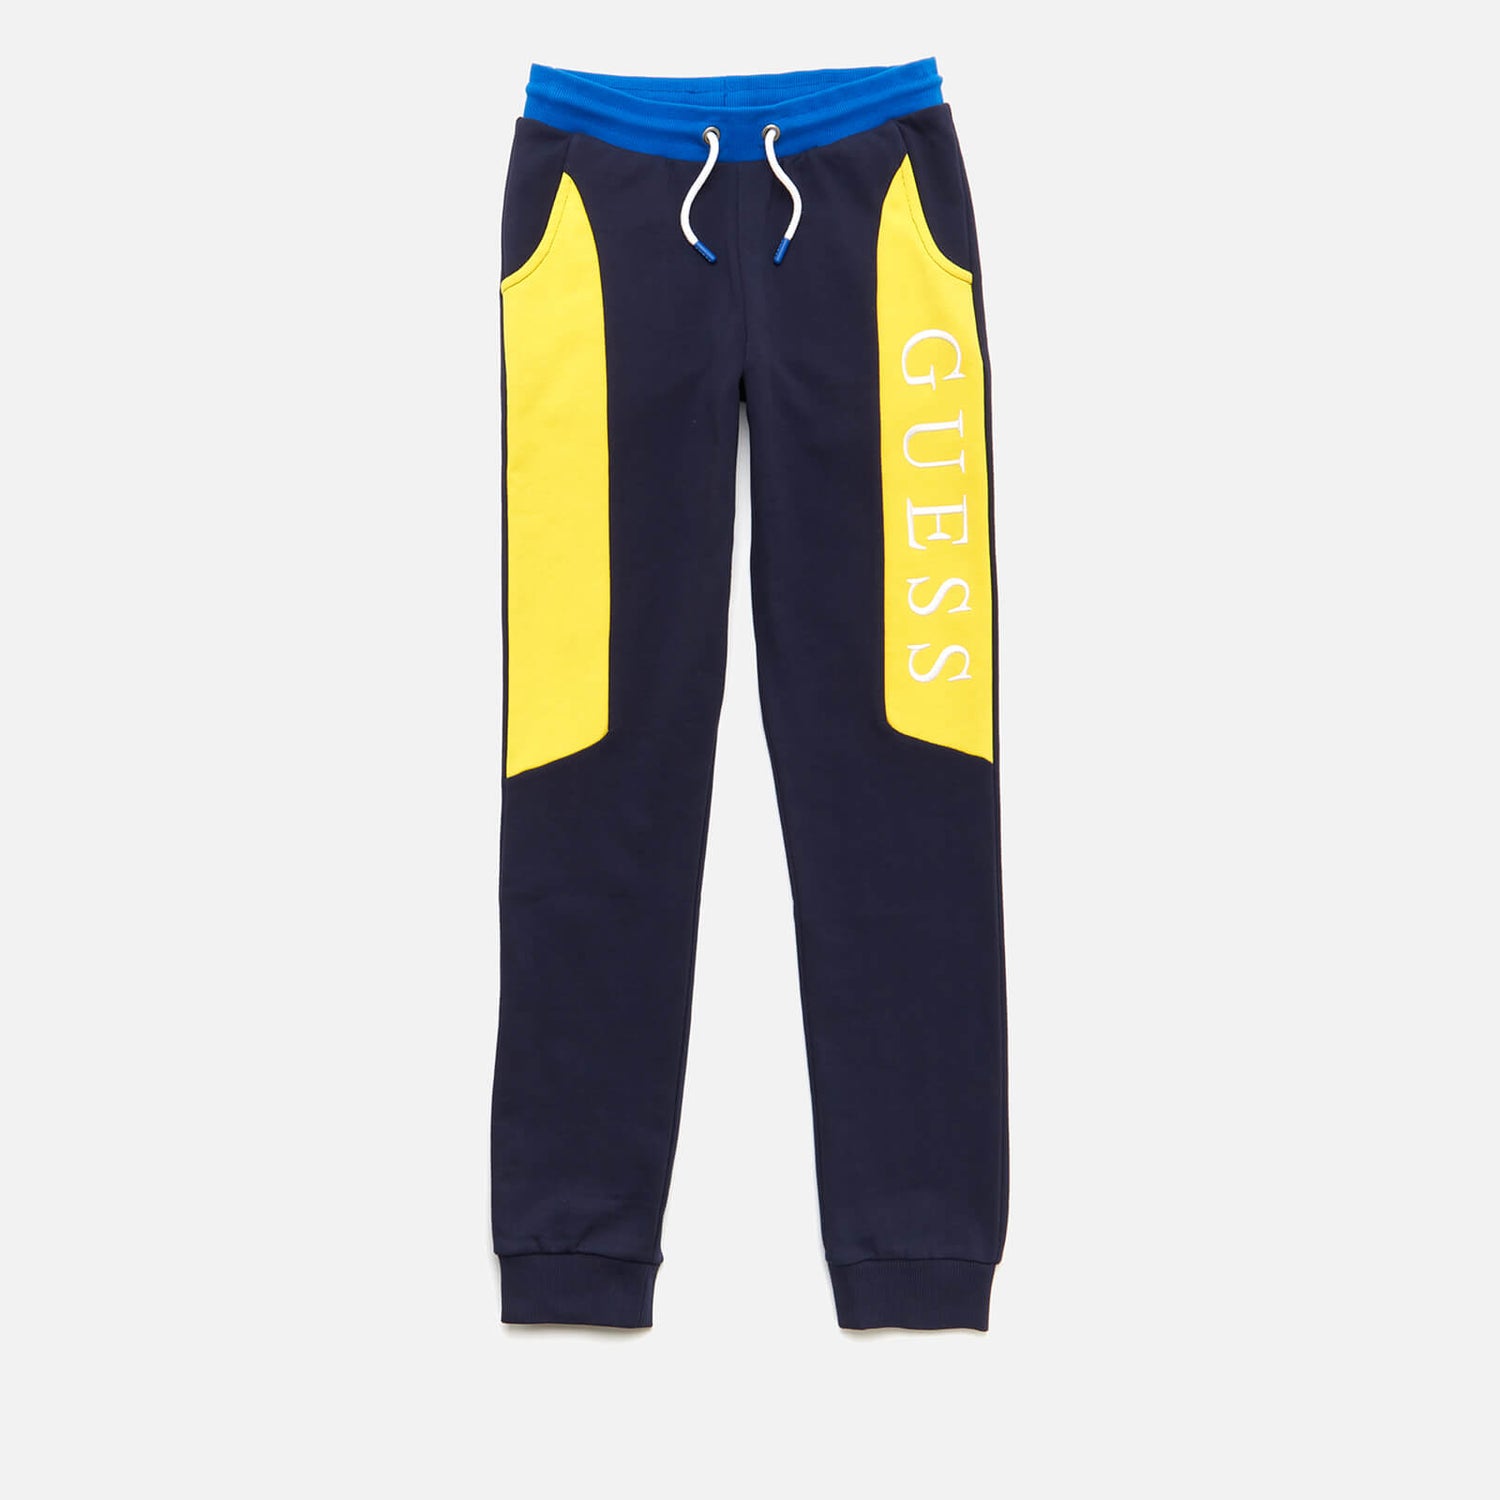 Guess Boys' Active Sweatpants - Blue and Yellow Comb - 3 Years